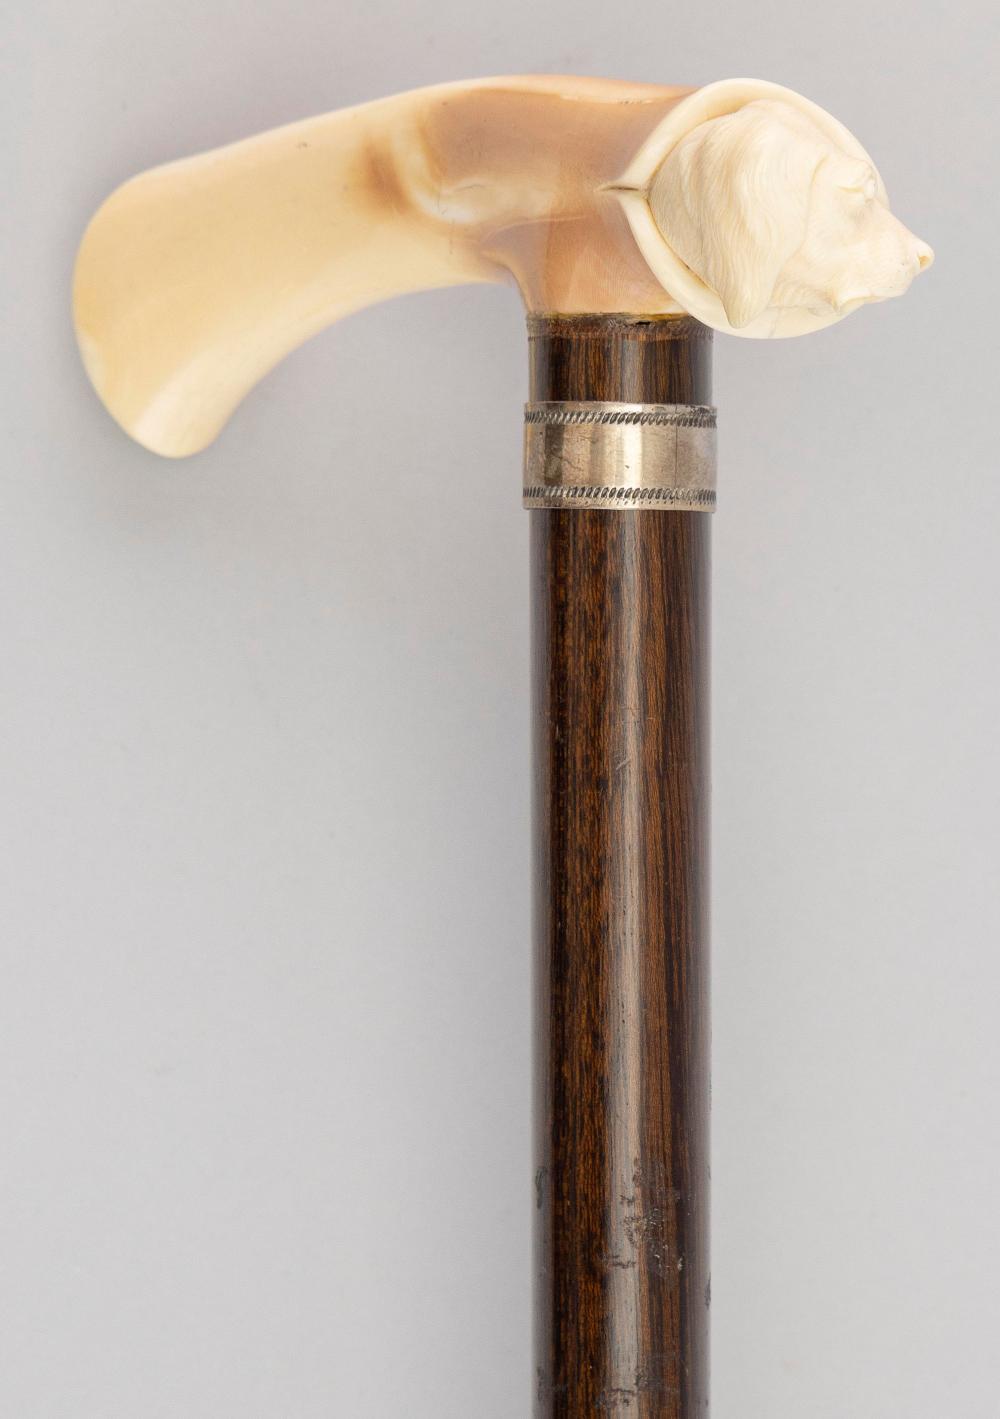 SHY DOG CANE LATE 19TH/EARLY 20TH